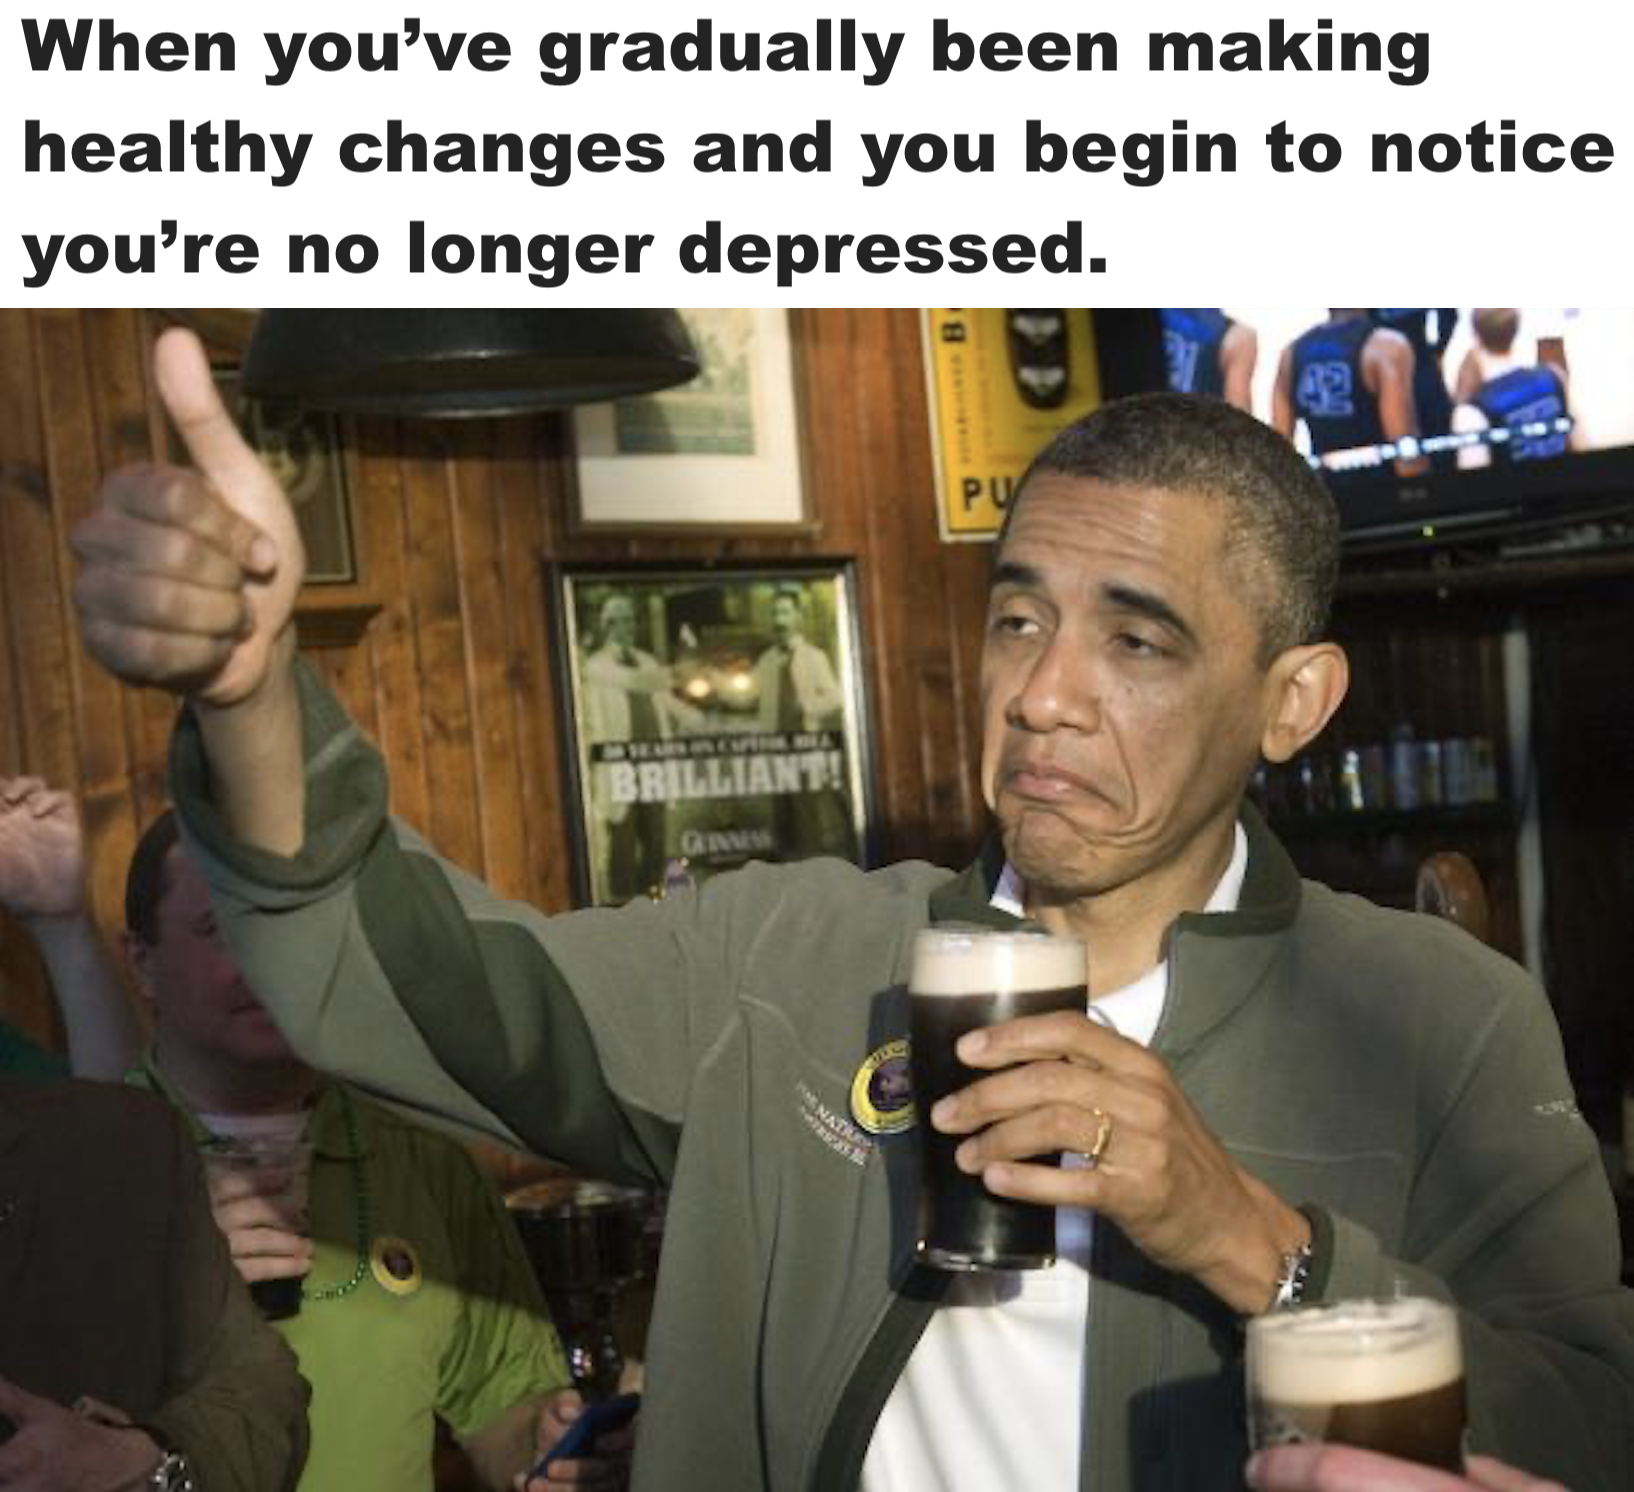 obama beer meme - When you've gradually been making healthy changes and you begin to notice you're no longer depressed.